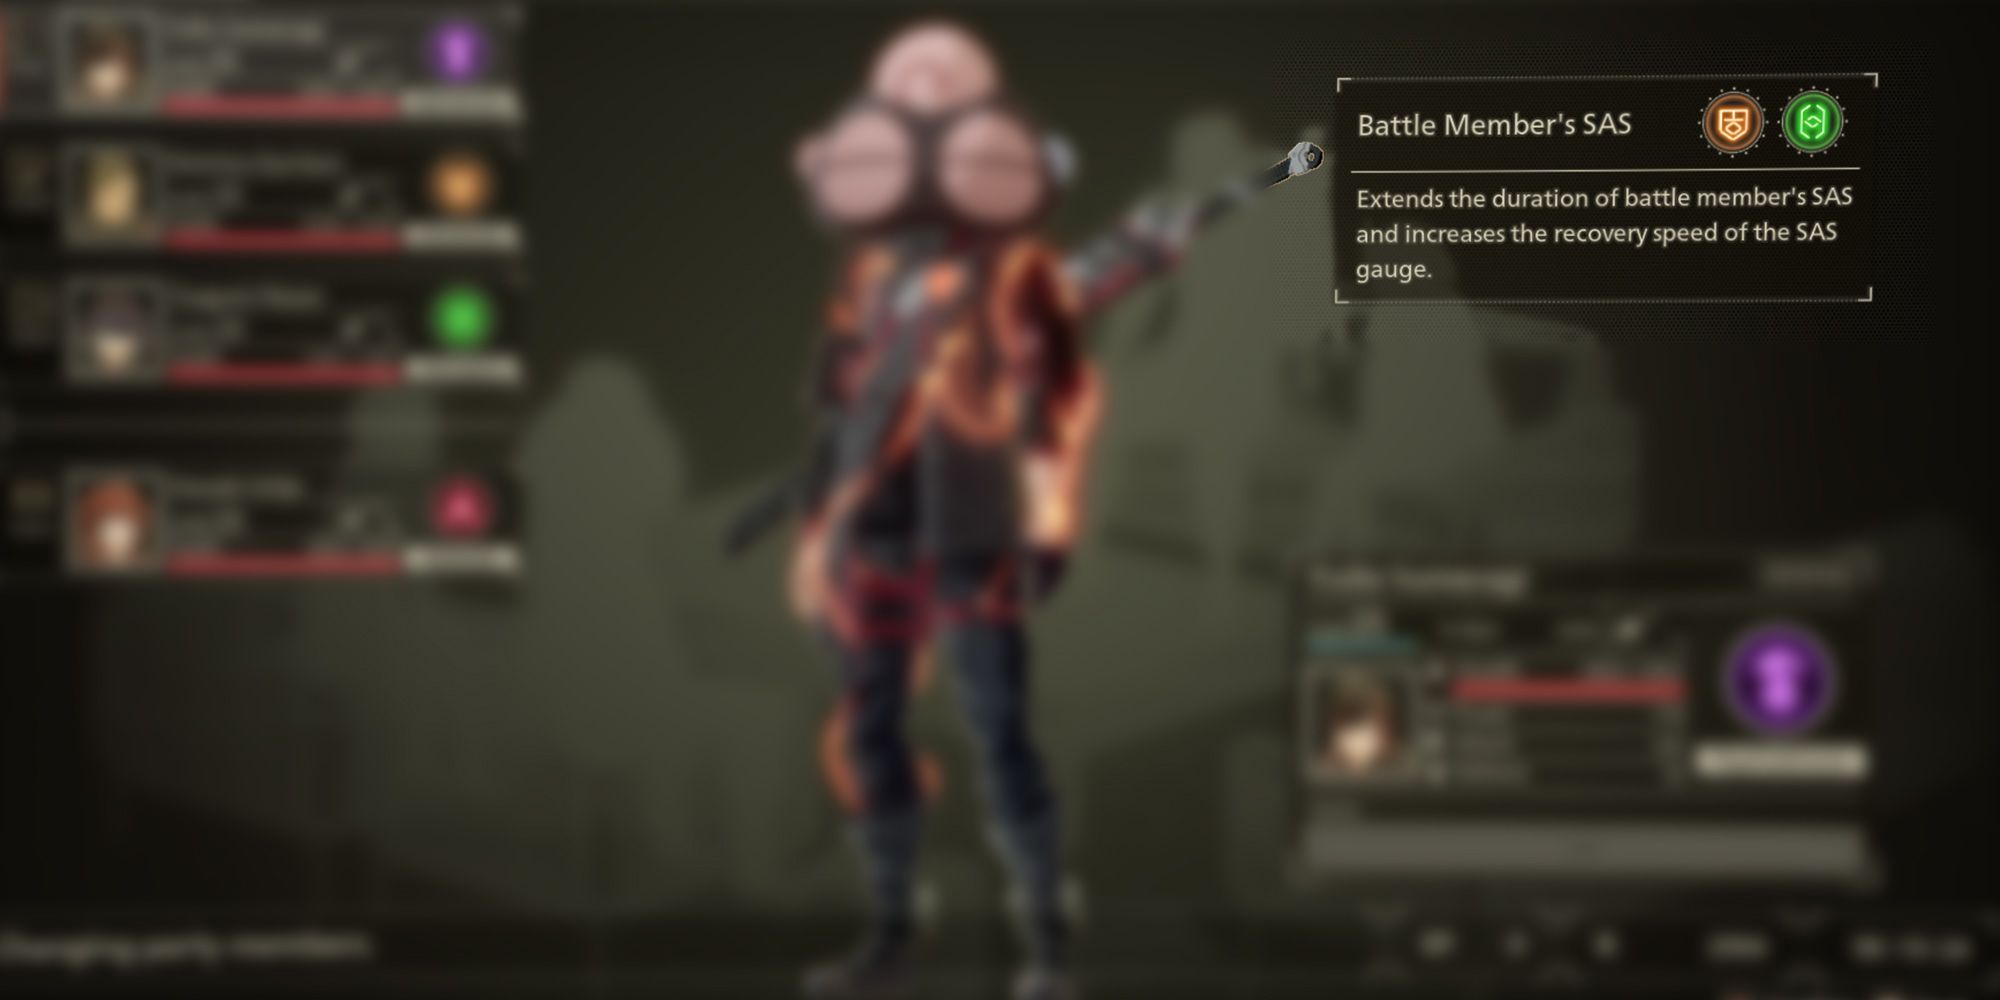 Scarlet Nexus - Showing In The Pause Menu Where It Describes The Passive Equipped Party SAS Effects